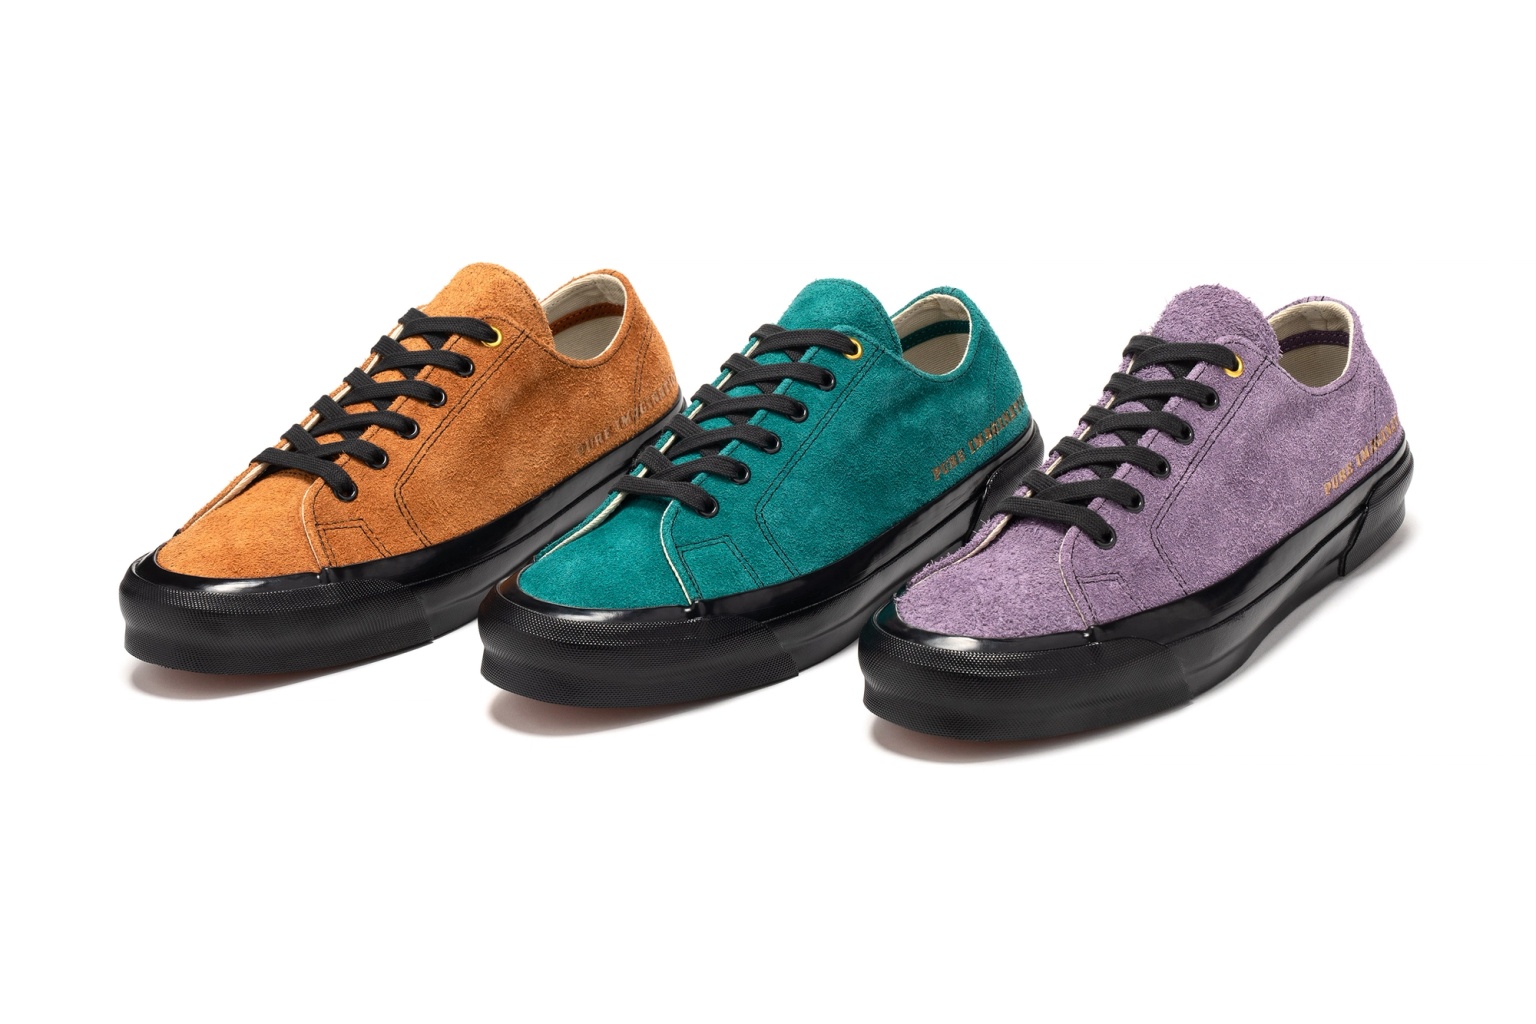 Vans Vault x  Klincewicz OG Style 31 LX Collection | Release Date: 05.07.22 